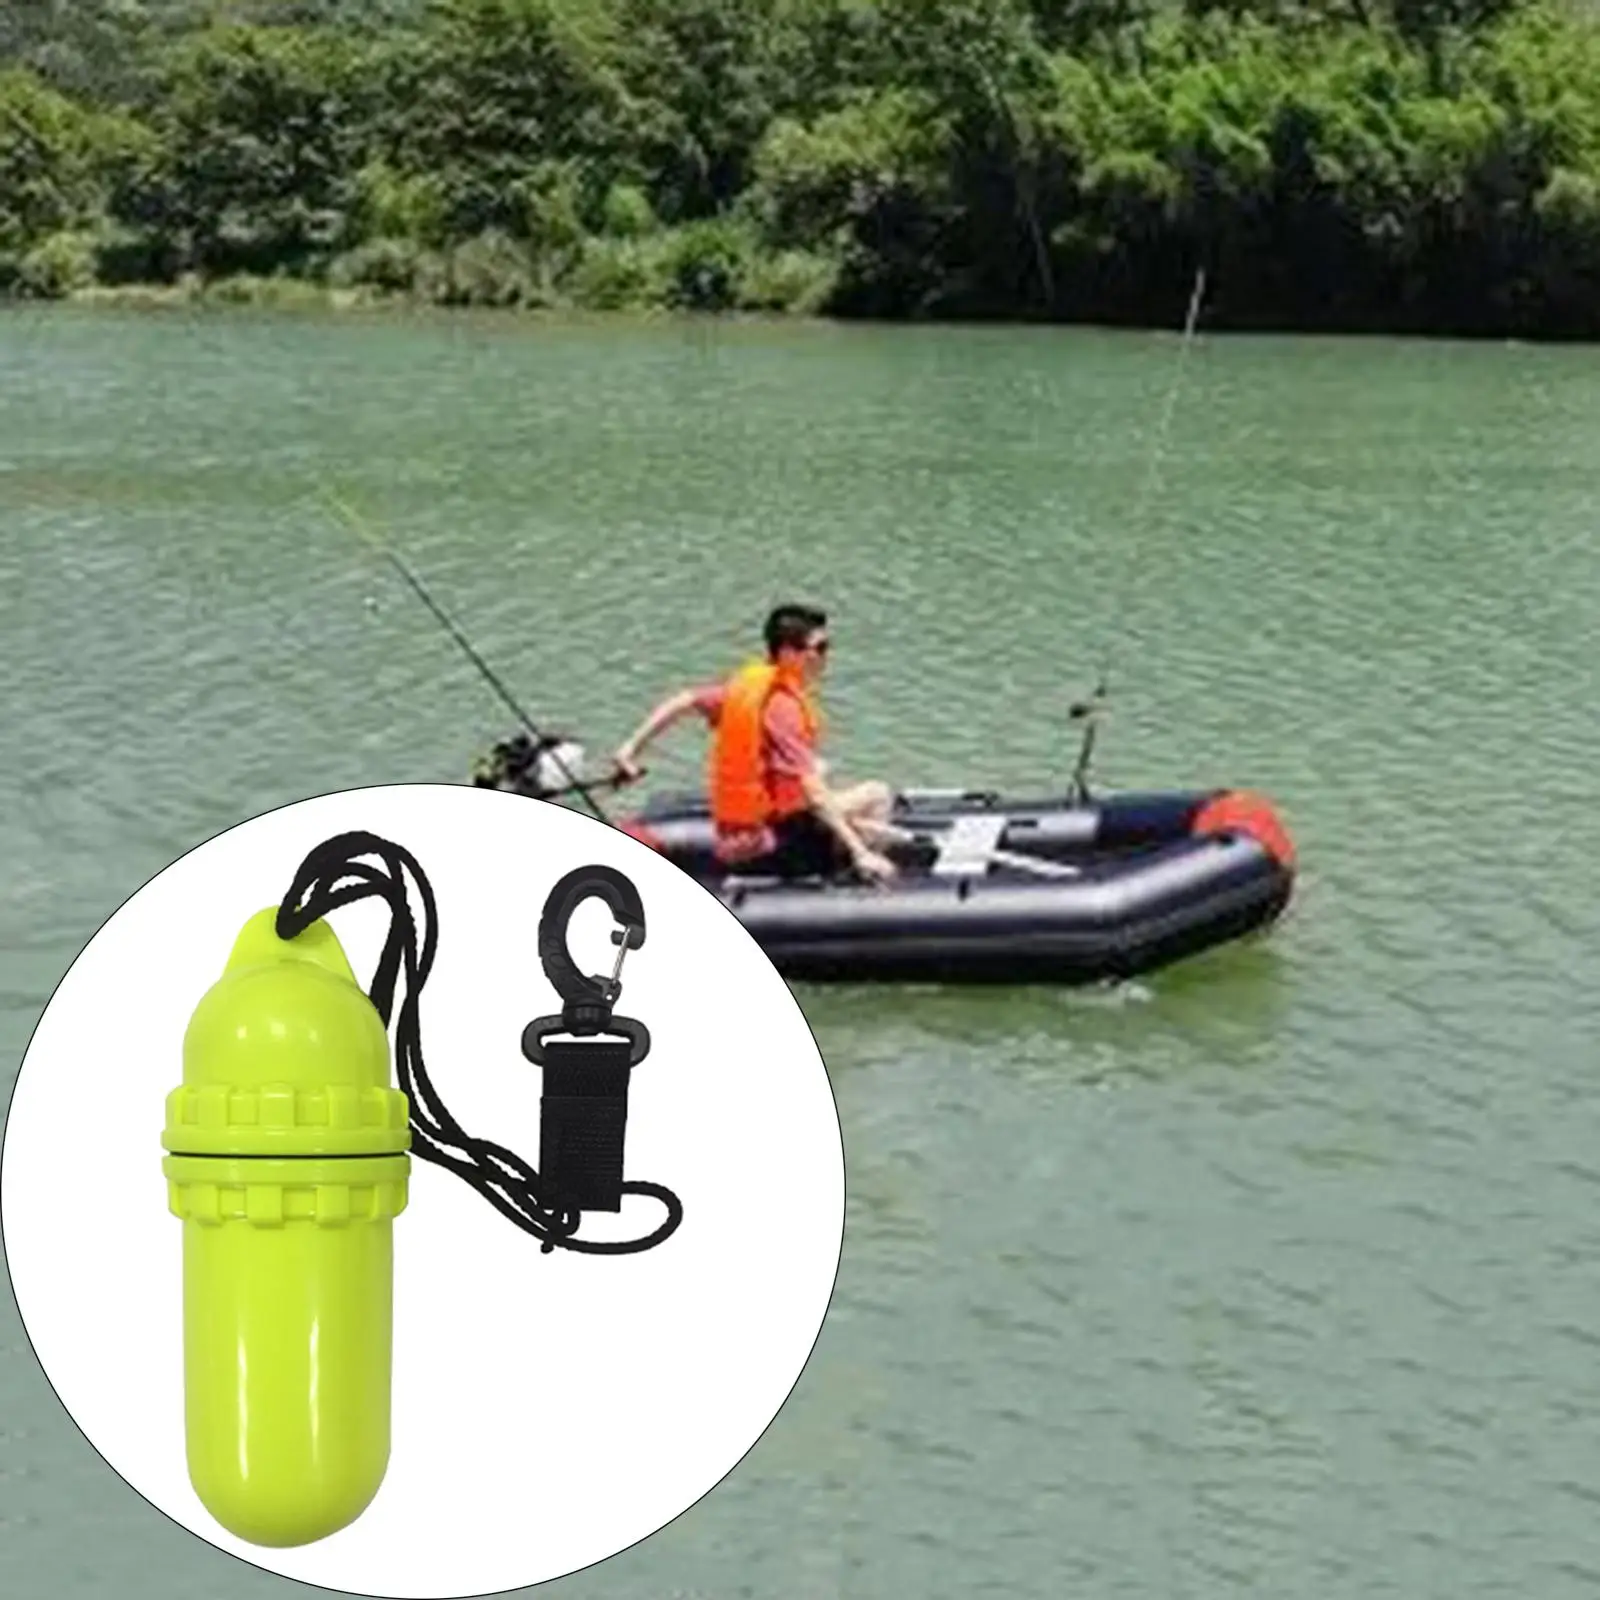 Scuba Diving Kayaking Waterproof Dry Box Gear Accessories Container Case & Rope Clip For Money ID Cards License Outdoor Sports